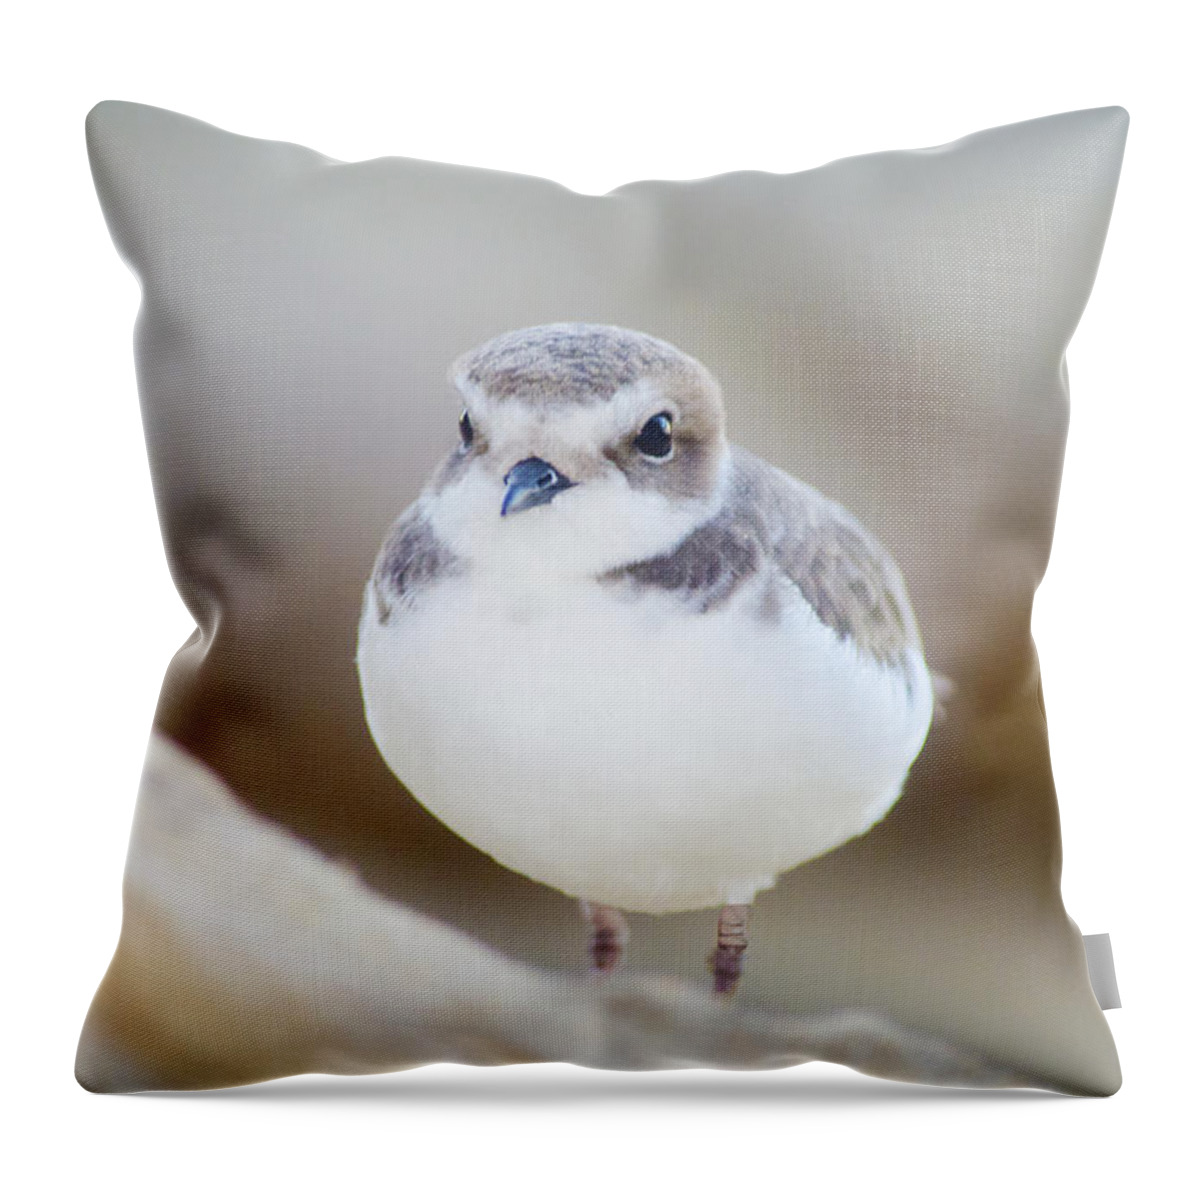 I Love Birds And Find Them Majestic Creatures. Throw Pillow featuring the photograph Beautiful Bird by Spencer Hughes